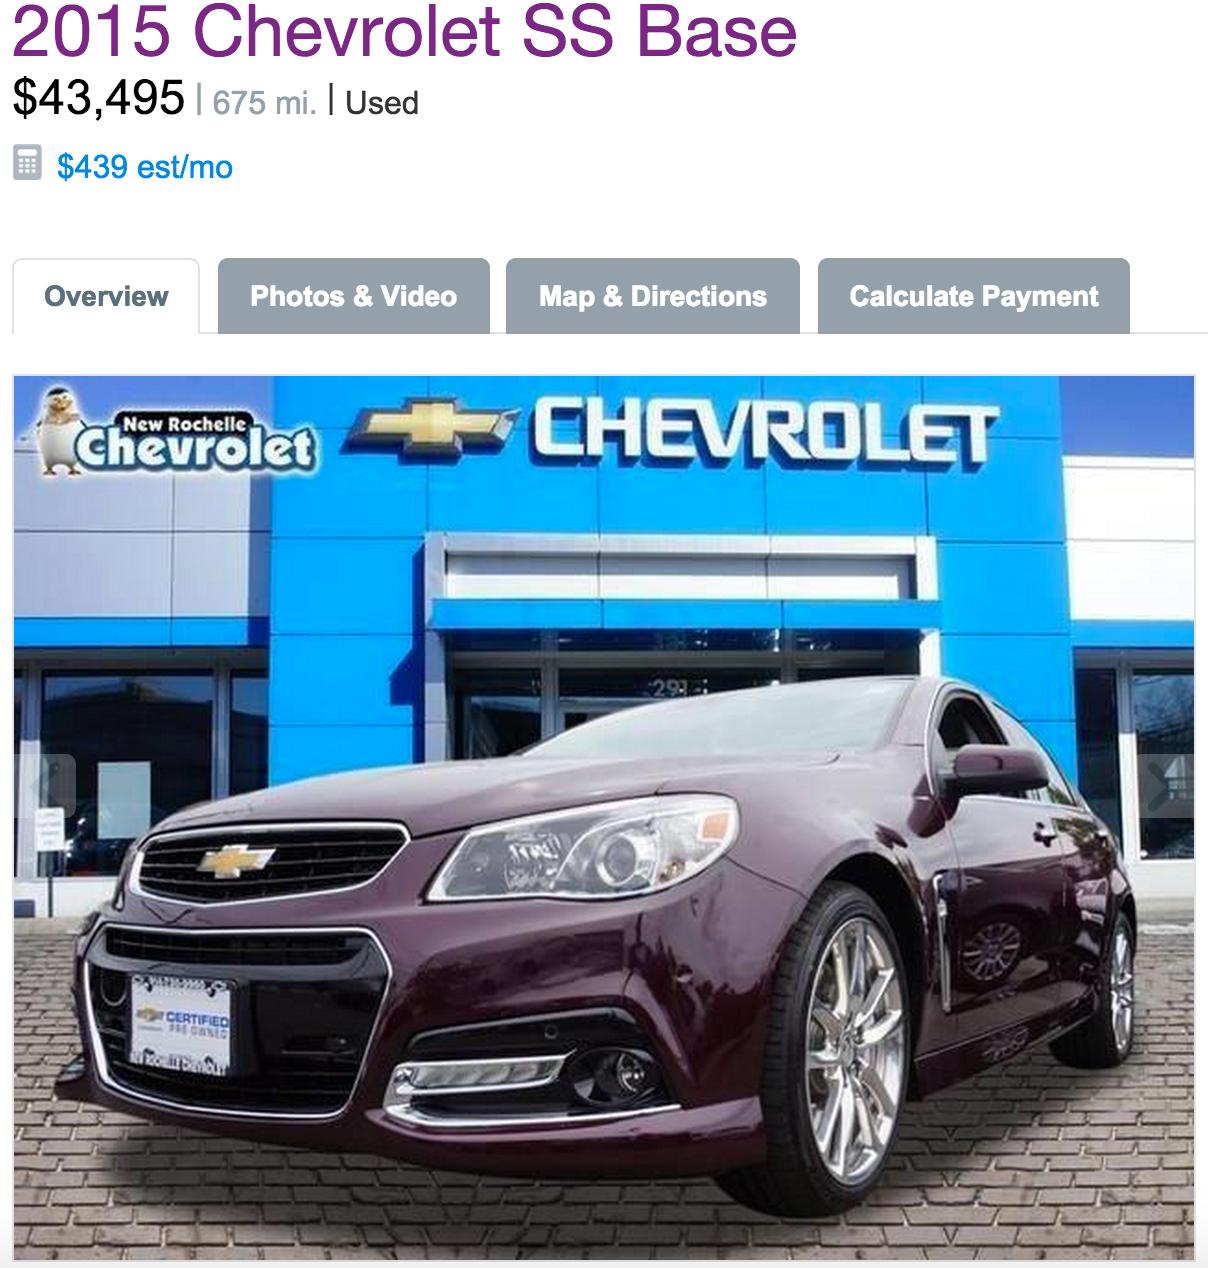 Chevy SS Capture